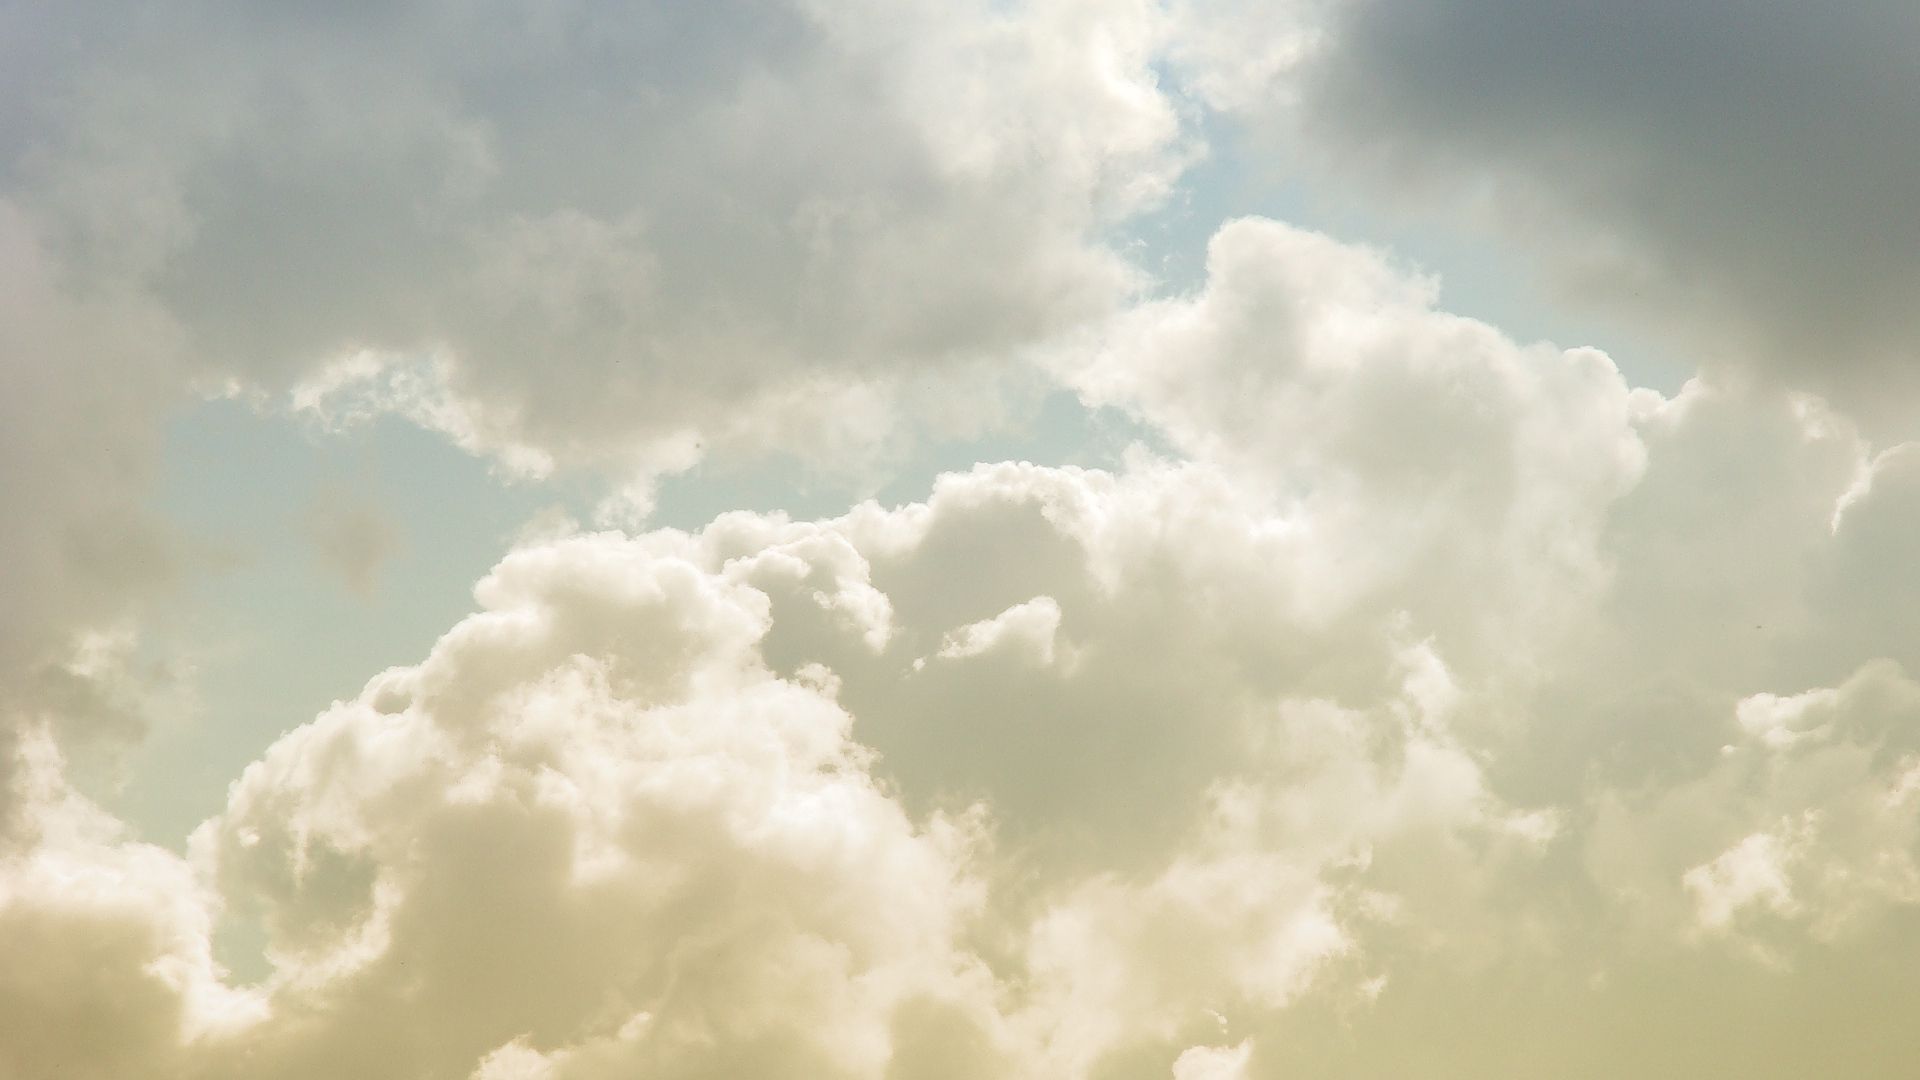 Clouds Tumblr Background Wallpaper - 23915